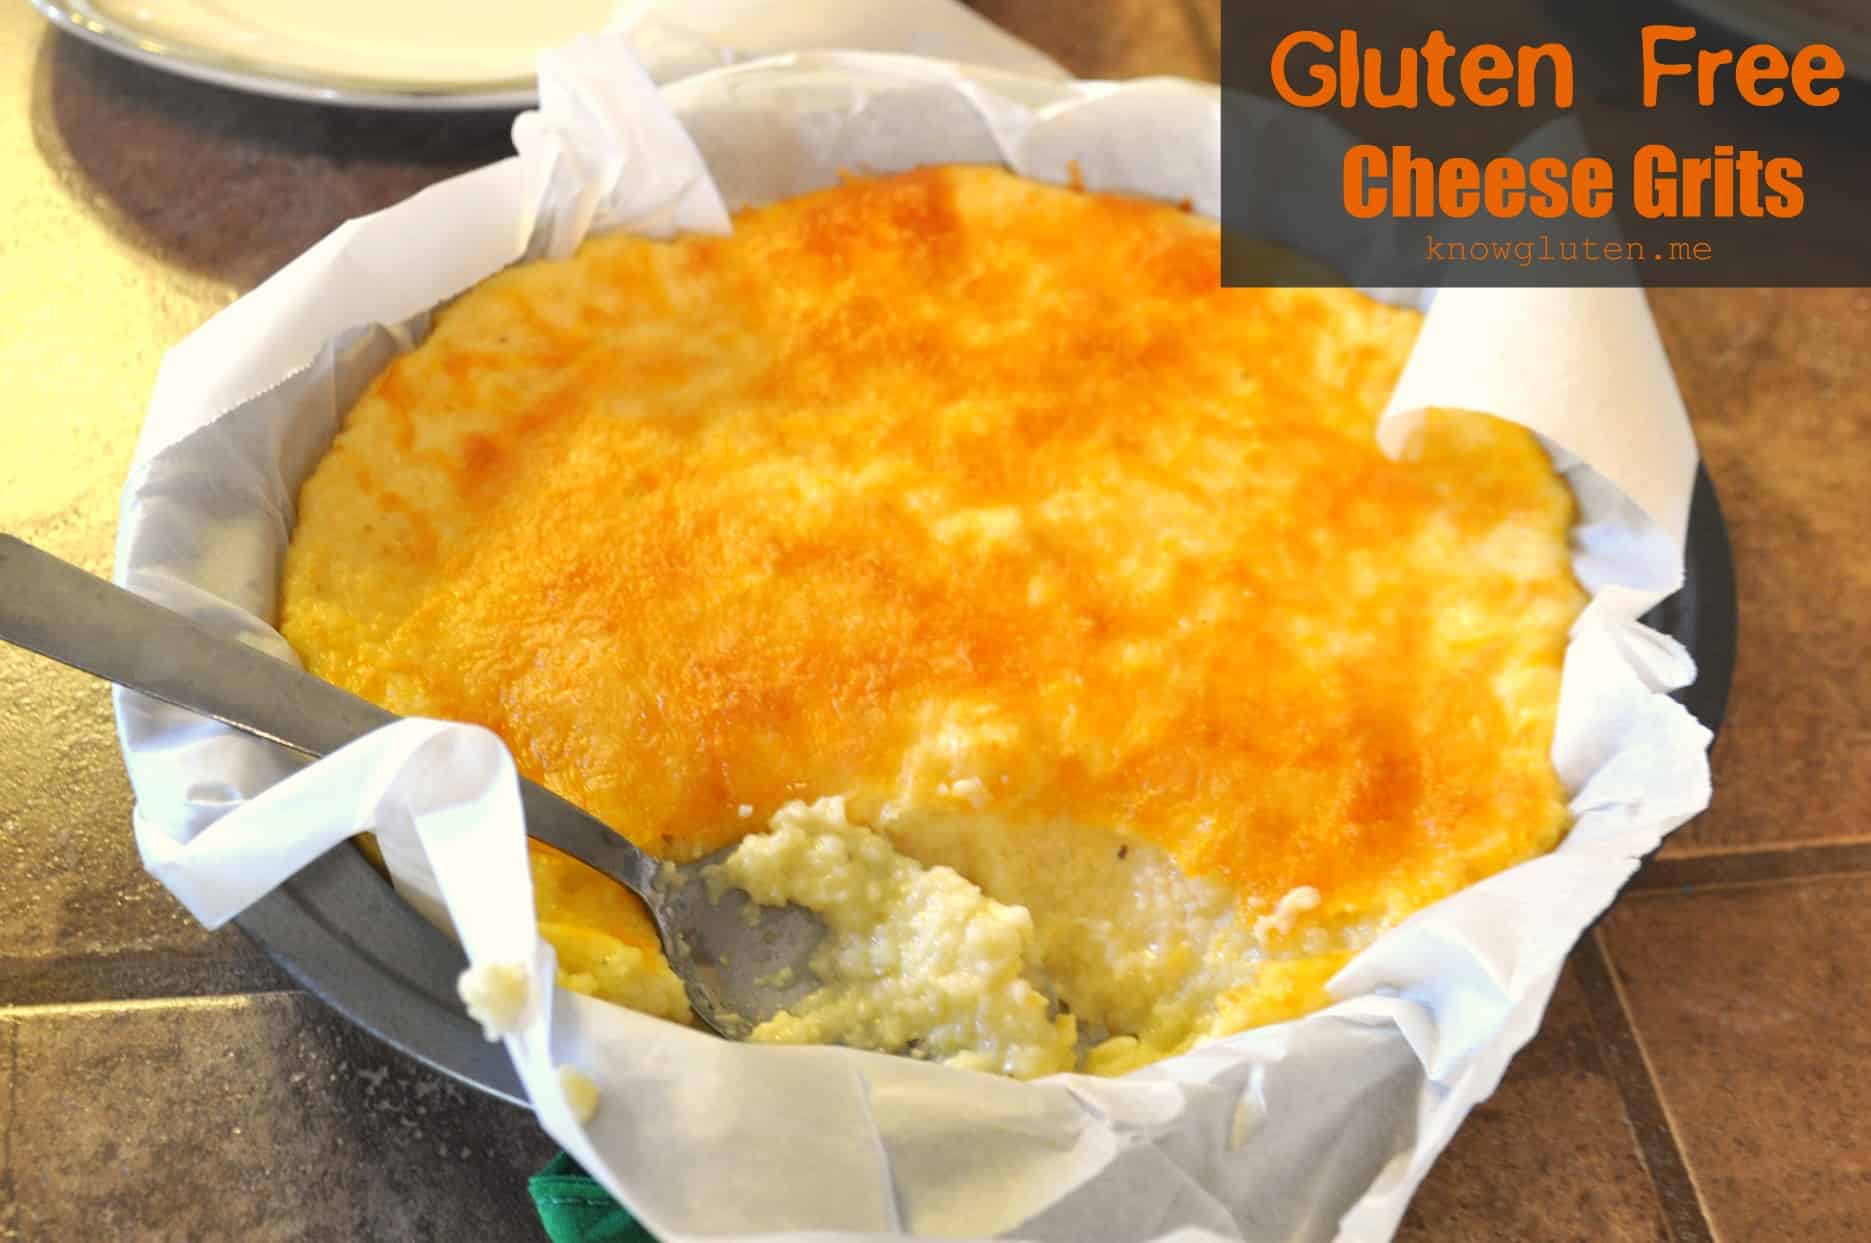 Gluten Free Cheese Grits from Knowgluten.me